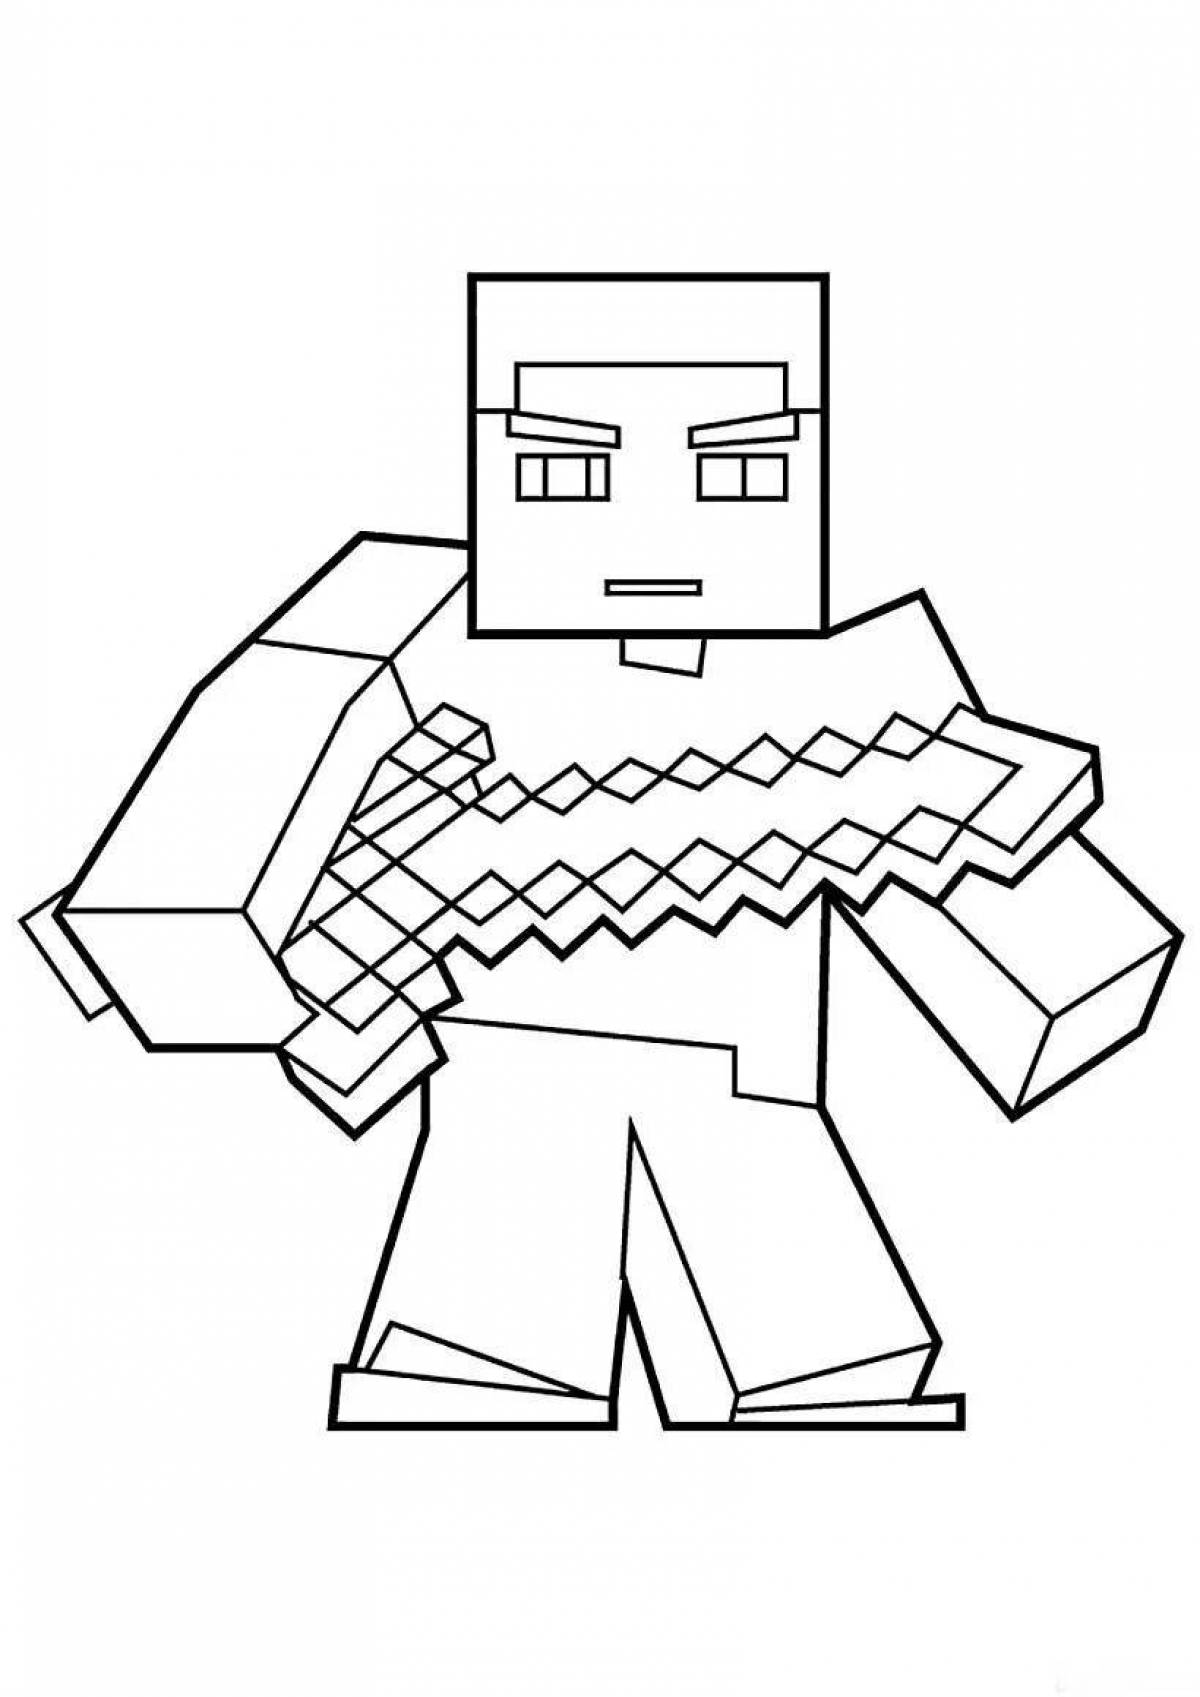 Fantastic cool minecraft coloring book for boys